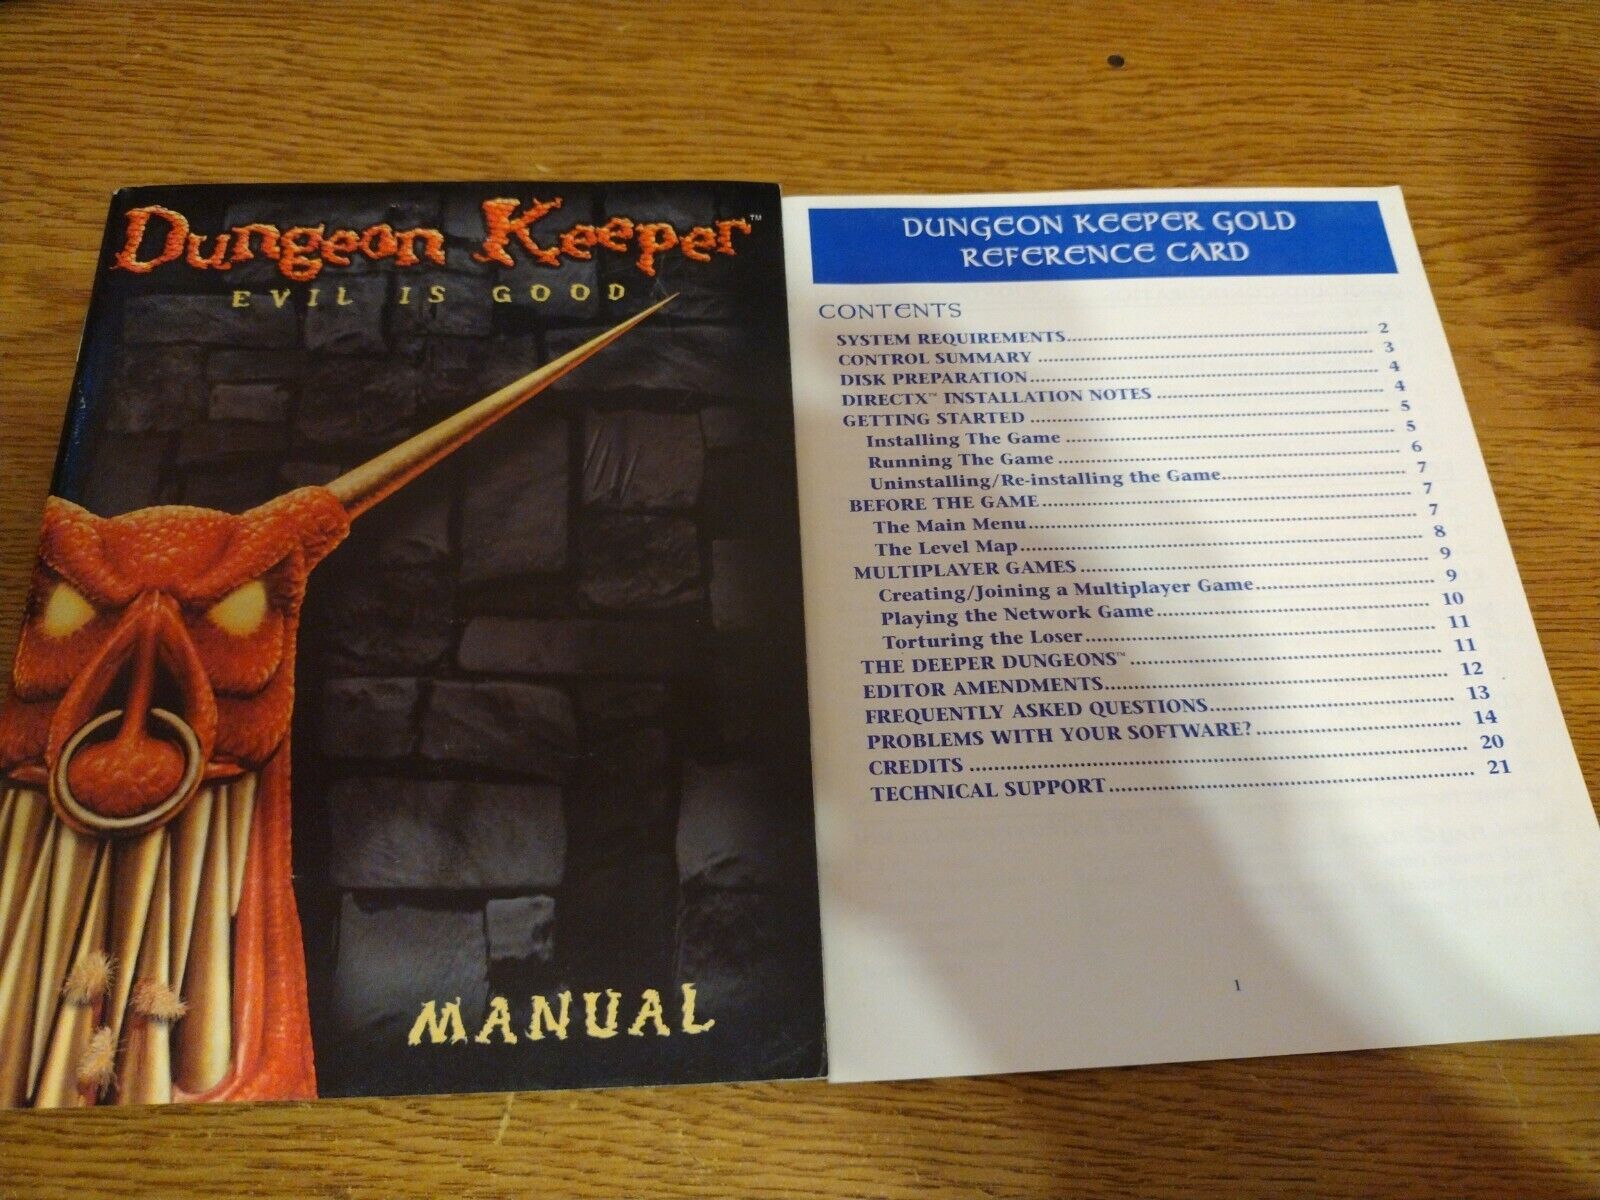 Dungeon Keeper Evil Is Good manual and reference card - No Game